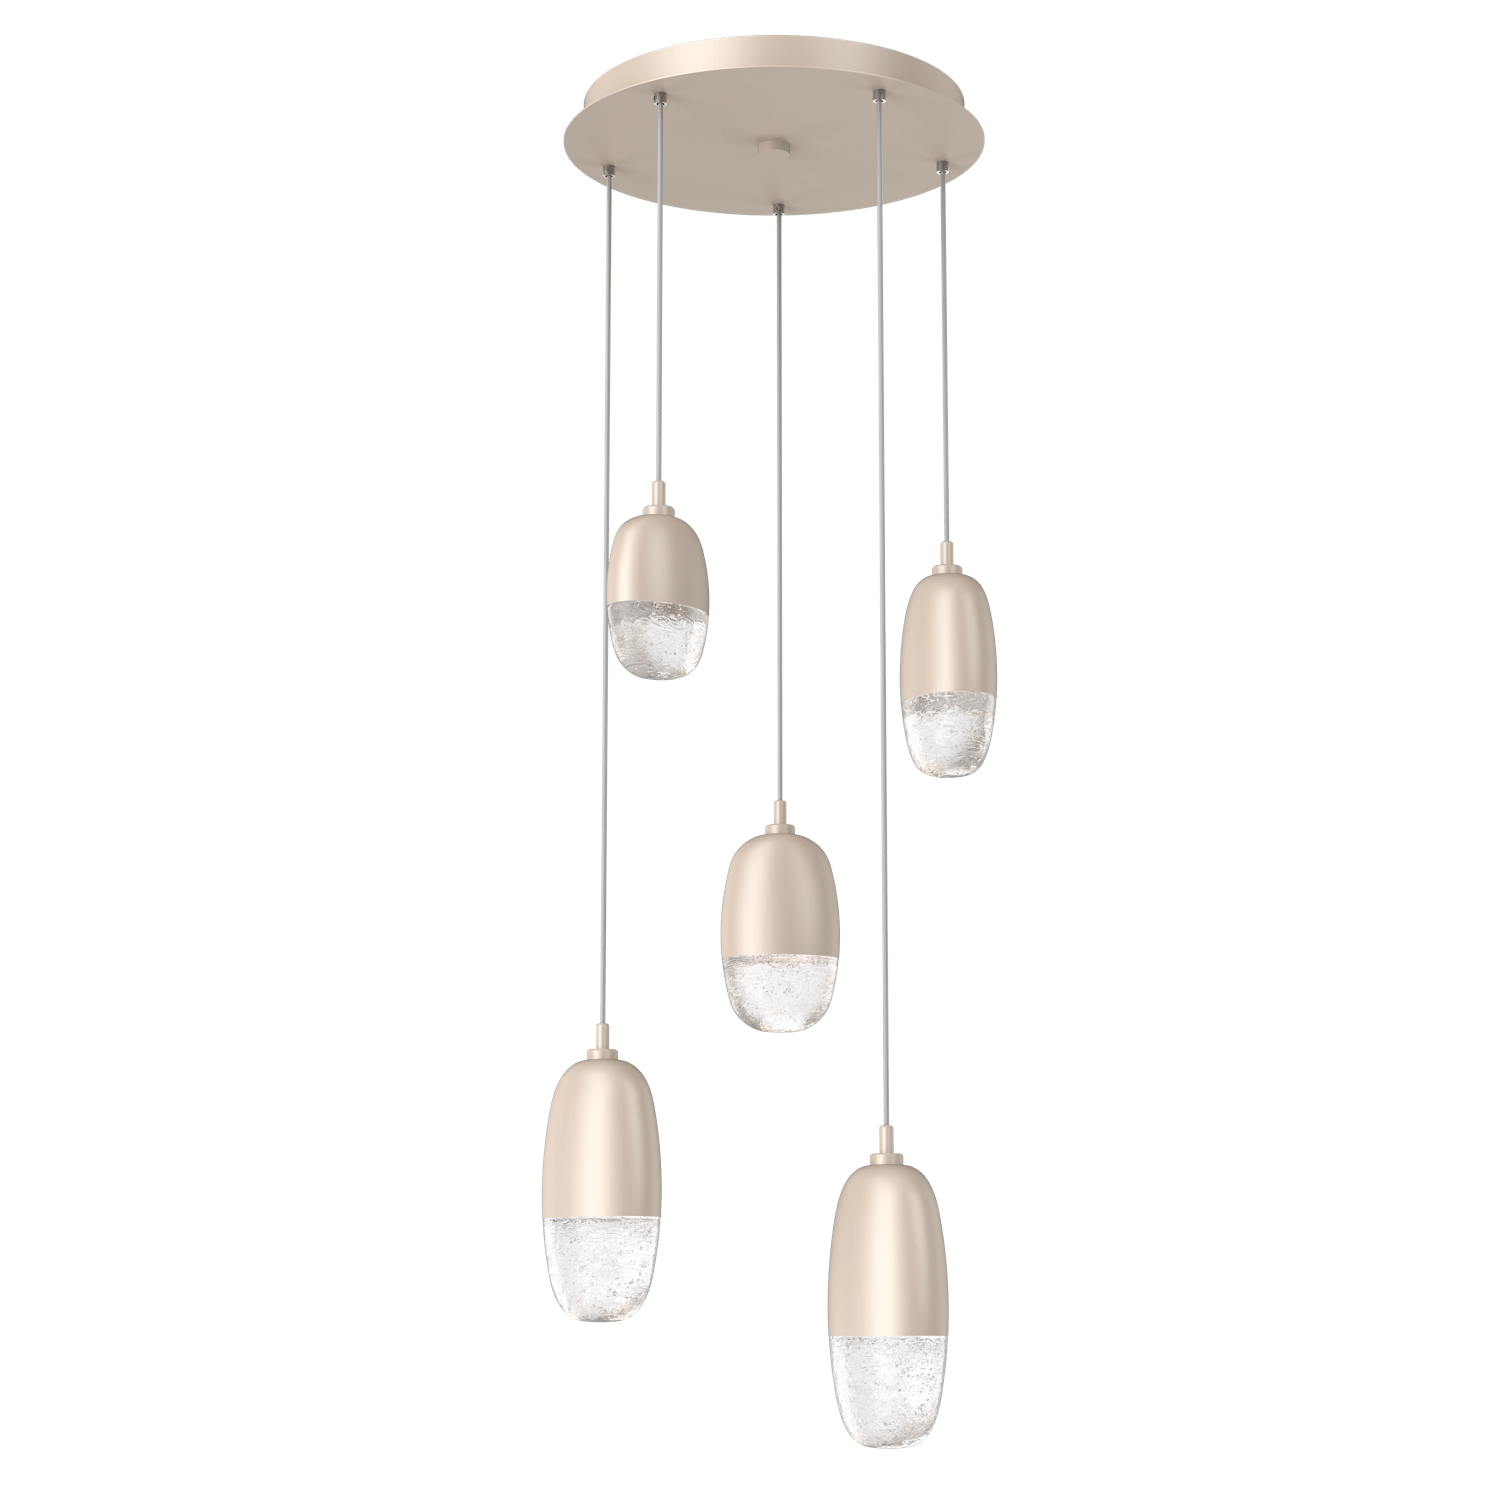 CHB0079-05-BS-Hammerton-Studio-Pebble-5-light-round-pendant-chandelier-with-metallic-beige-silver-finish-and-clear-cast-glass-shades-and-LED-lamping